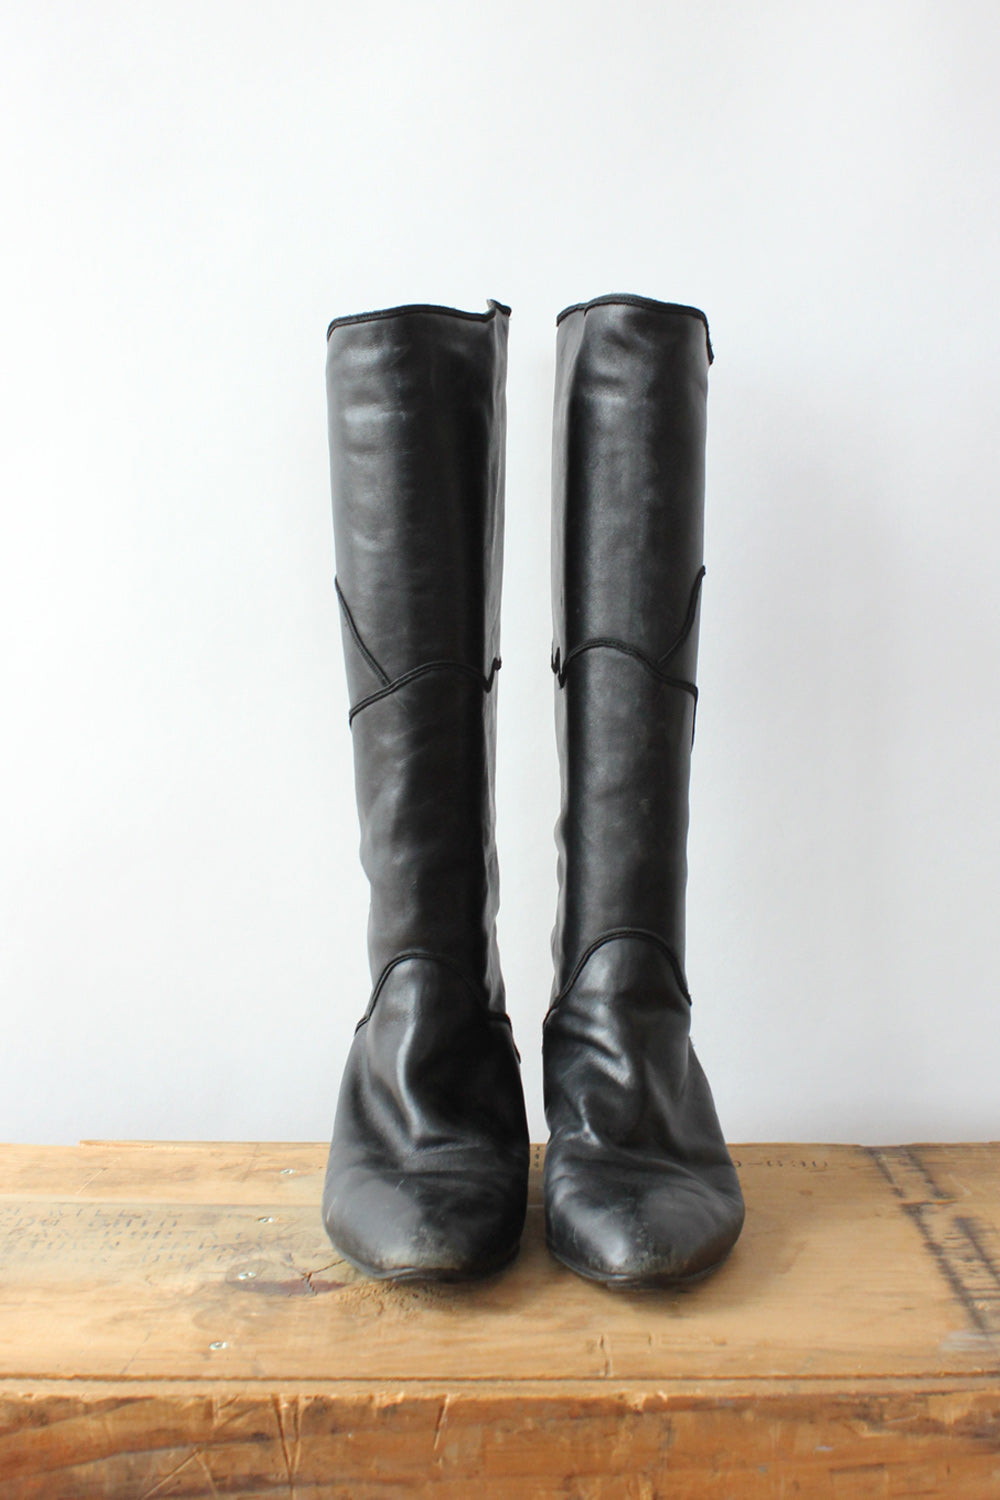 Italian Leather Scallop Boots 8-8.5